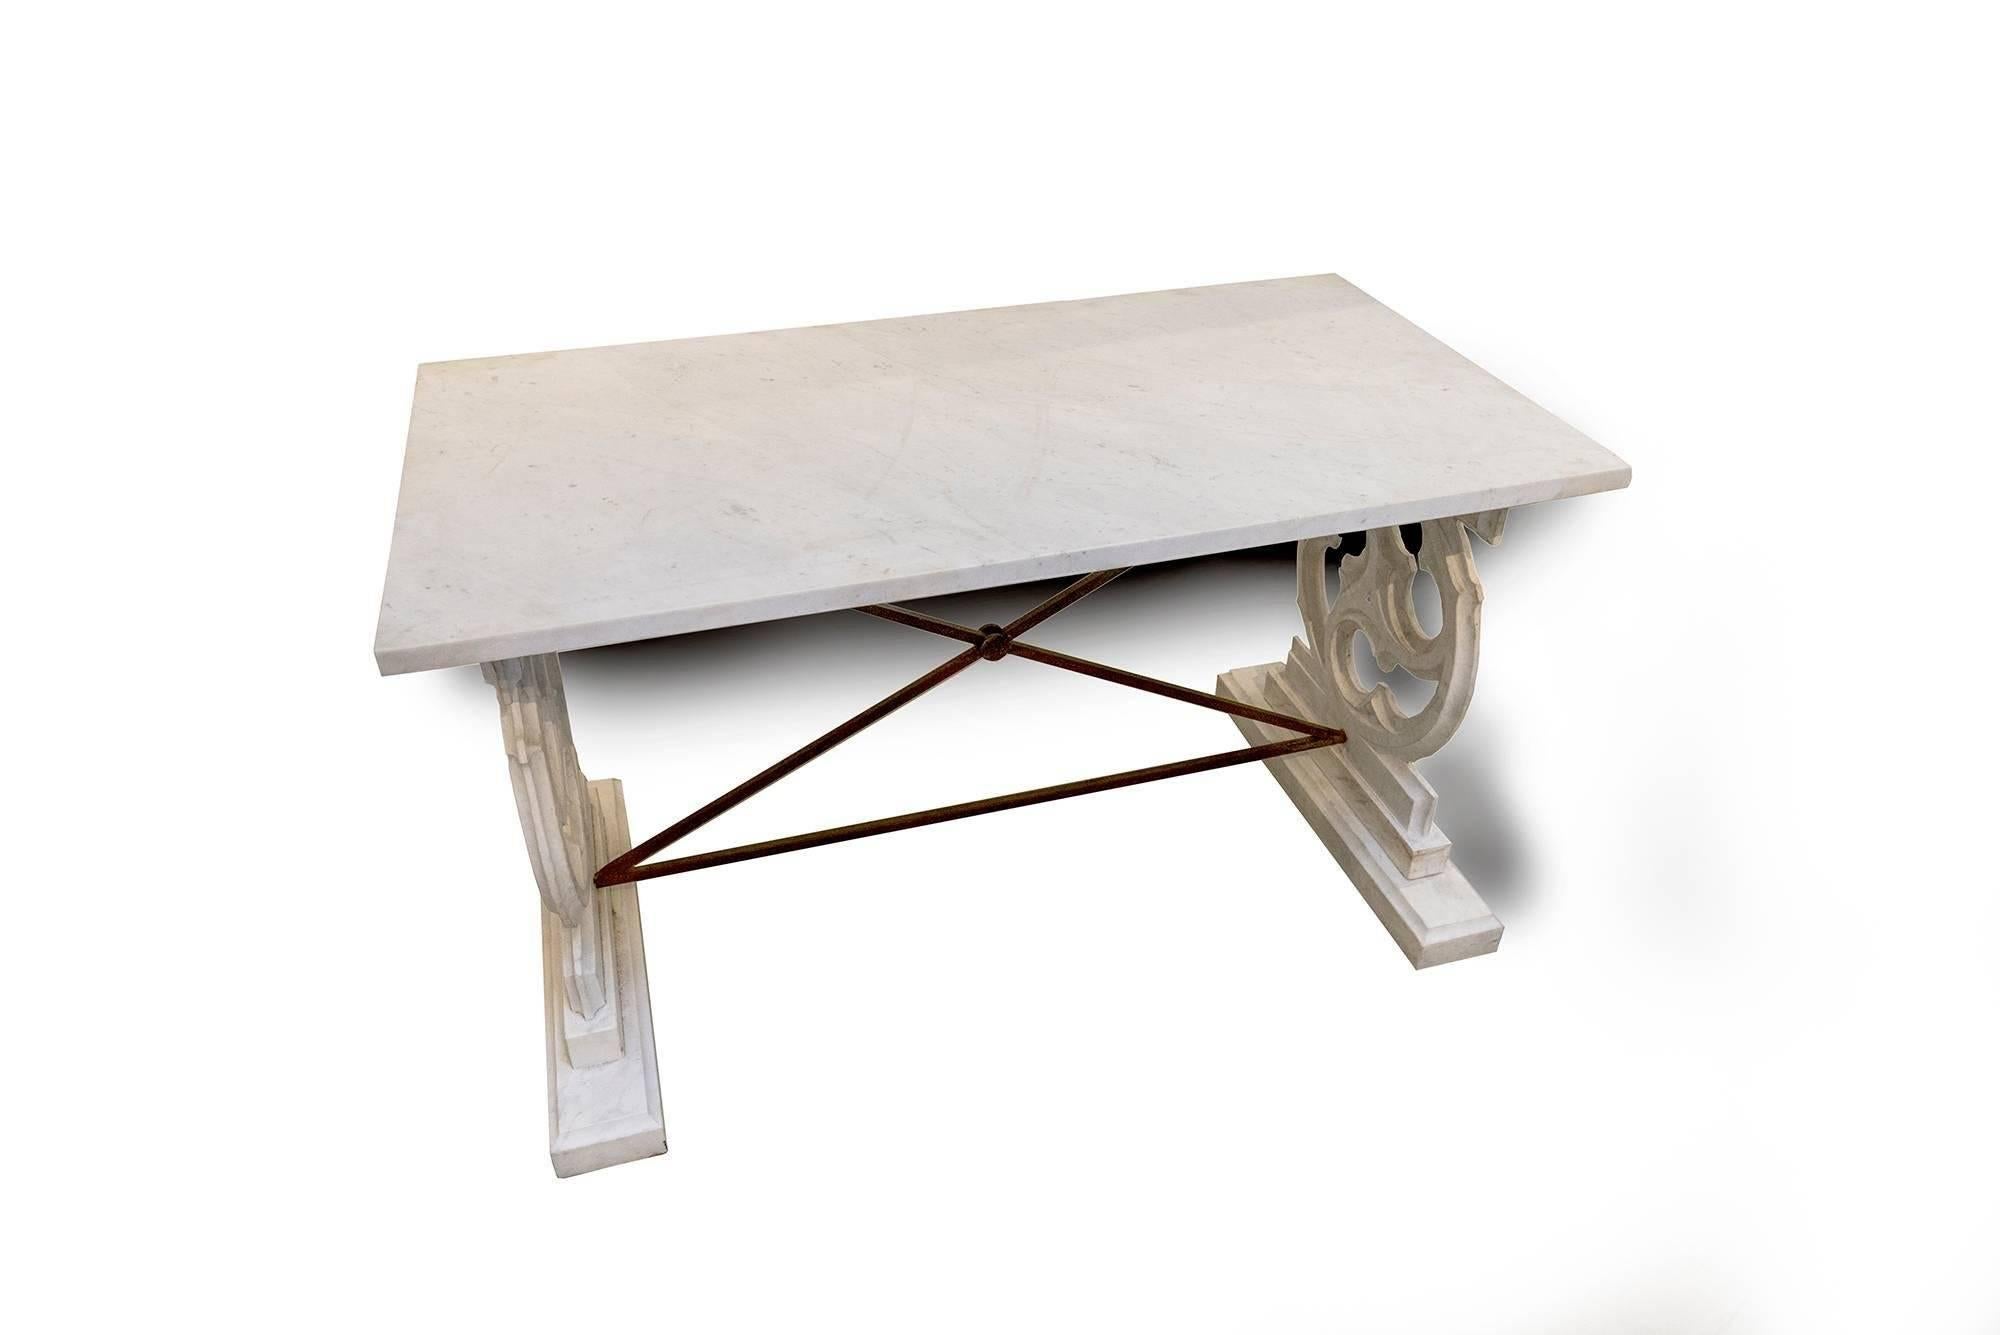 An exceptionally marvelous piece serves as a console, a work table, a garden accent or entry console. Such a magnificent design with the side pieces carved and the studs providing additional support or as a footrest if used as work table.